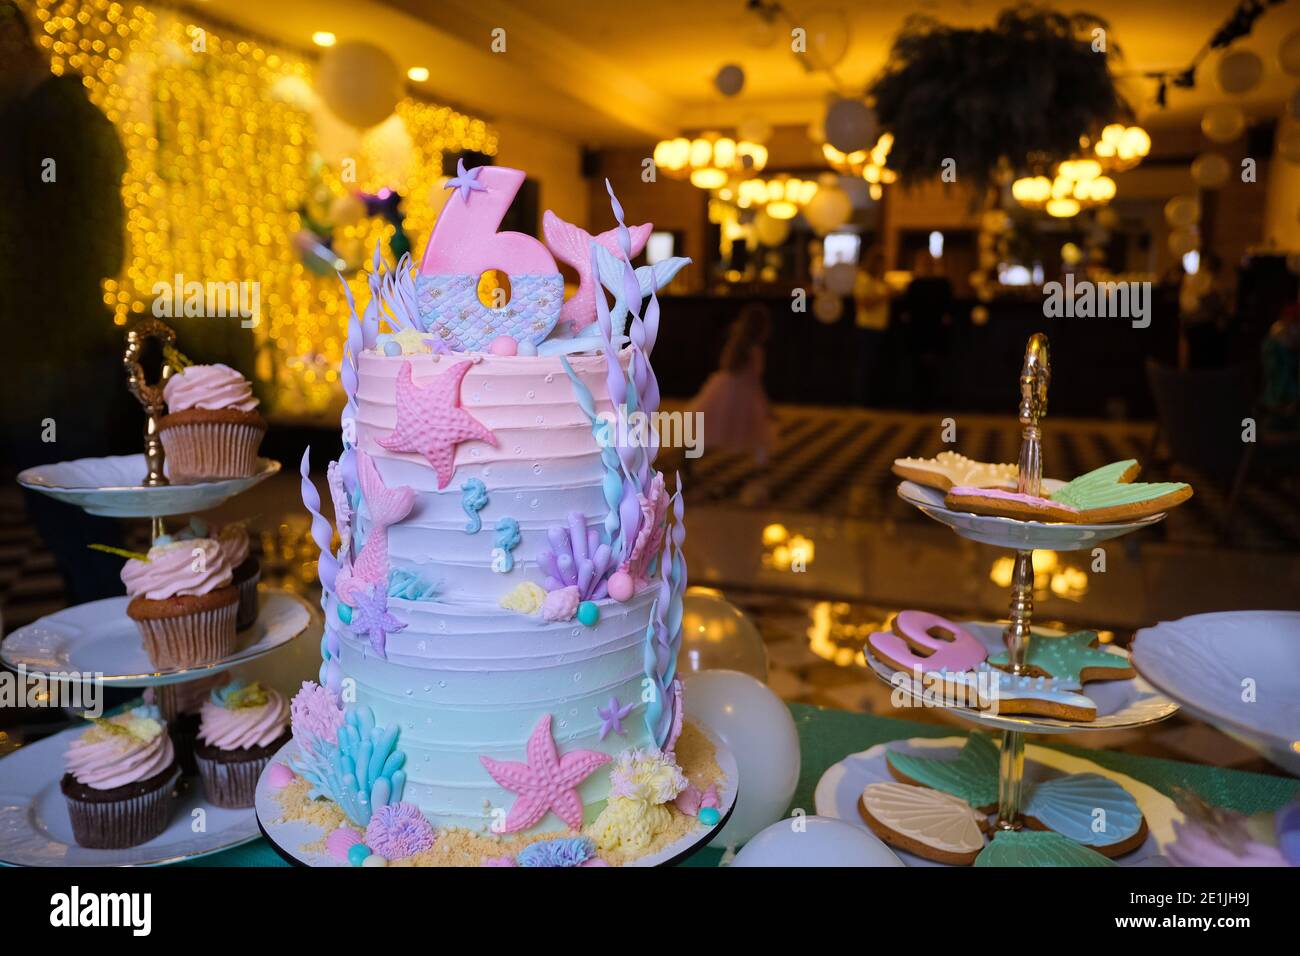 Delectable birthday Mermaid theme cake decorated with colorful seashells and starfish with number 6 served on table with cupcakes and sweets during ce Stock Photo